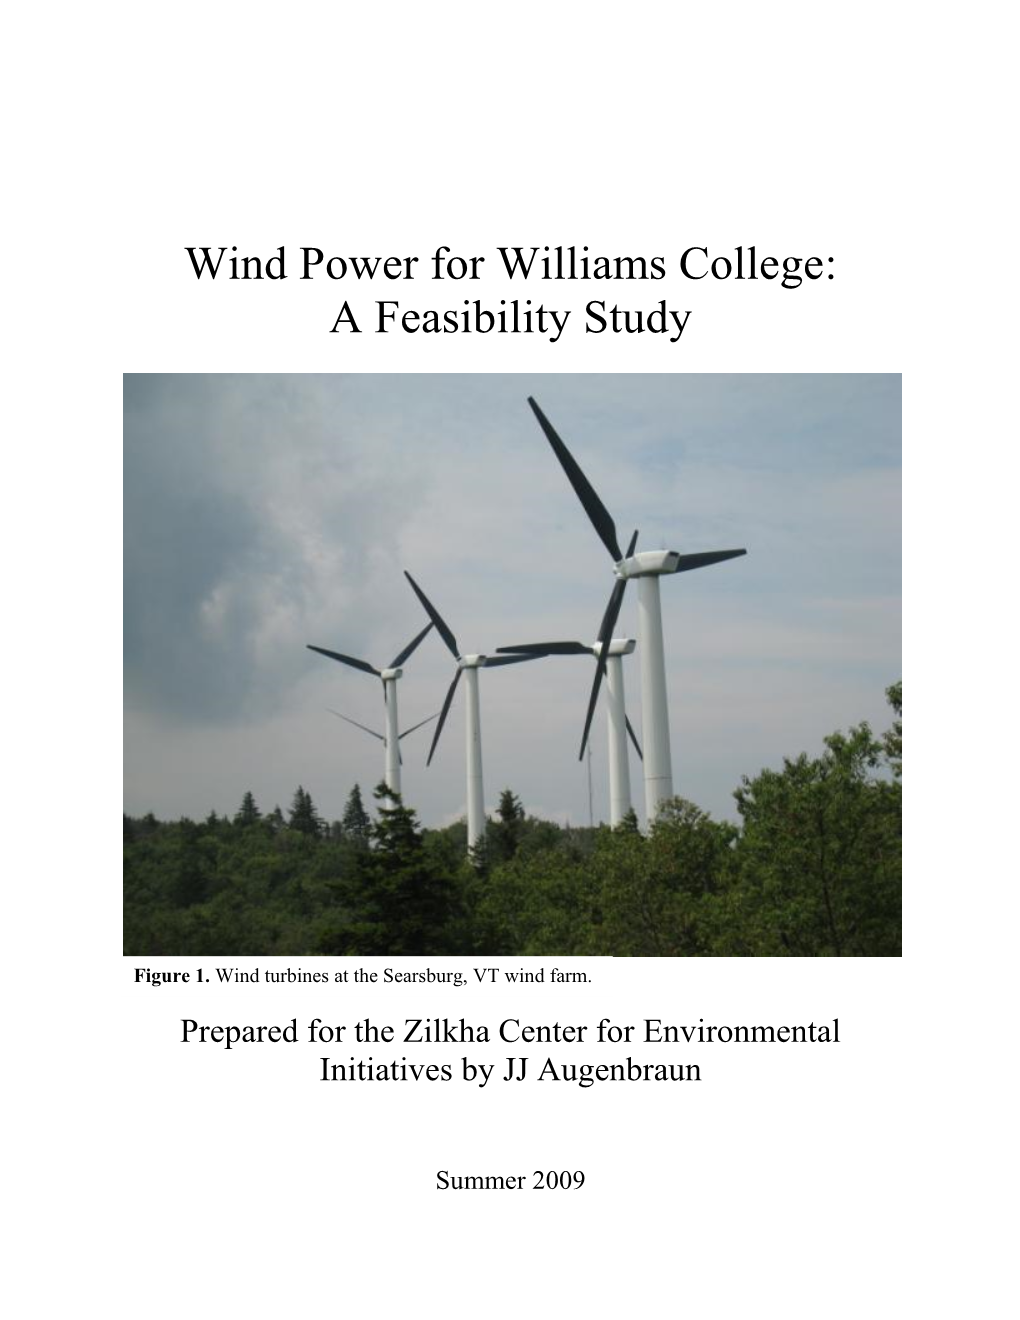 Wind Power for Williams College: a Feasibility Study